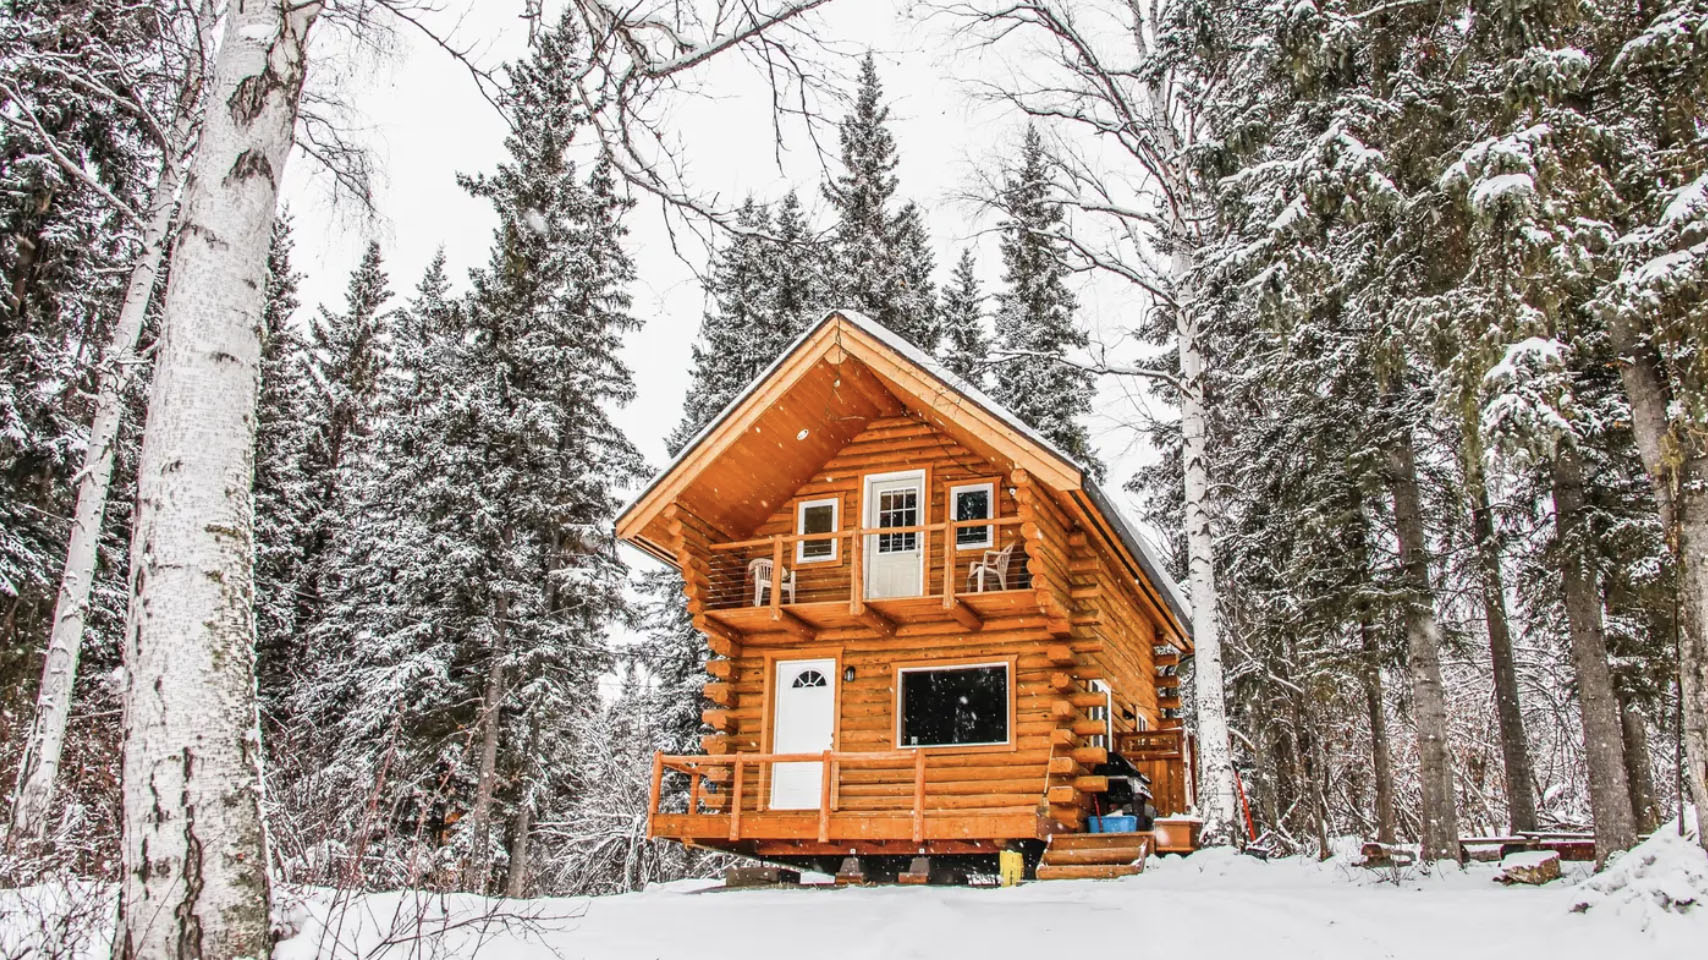 50 Amazing Airbnbs for the Holidays image